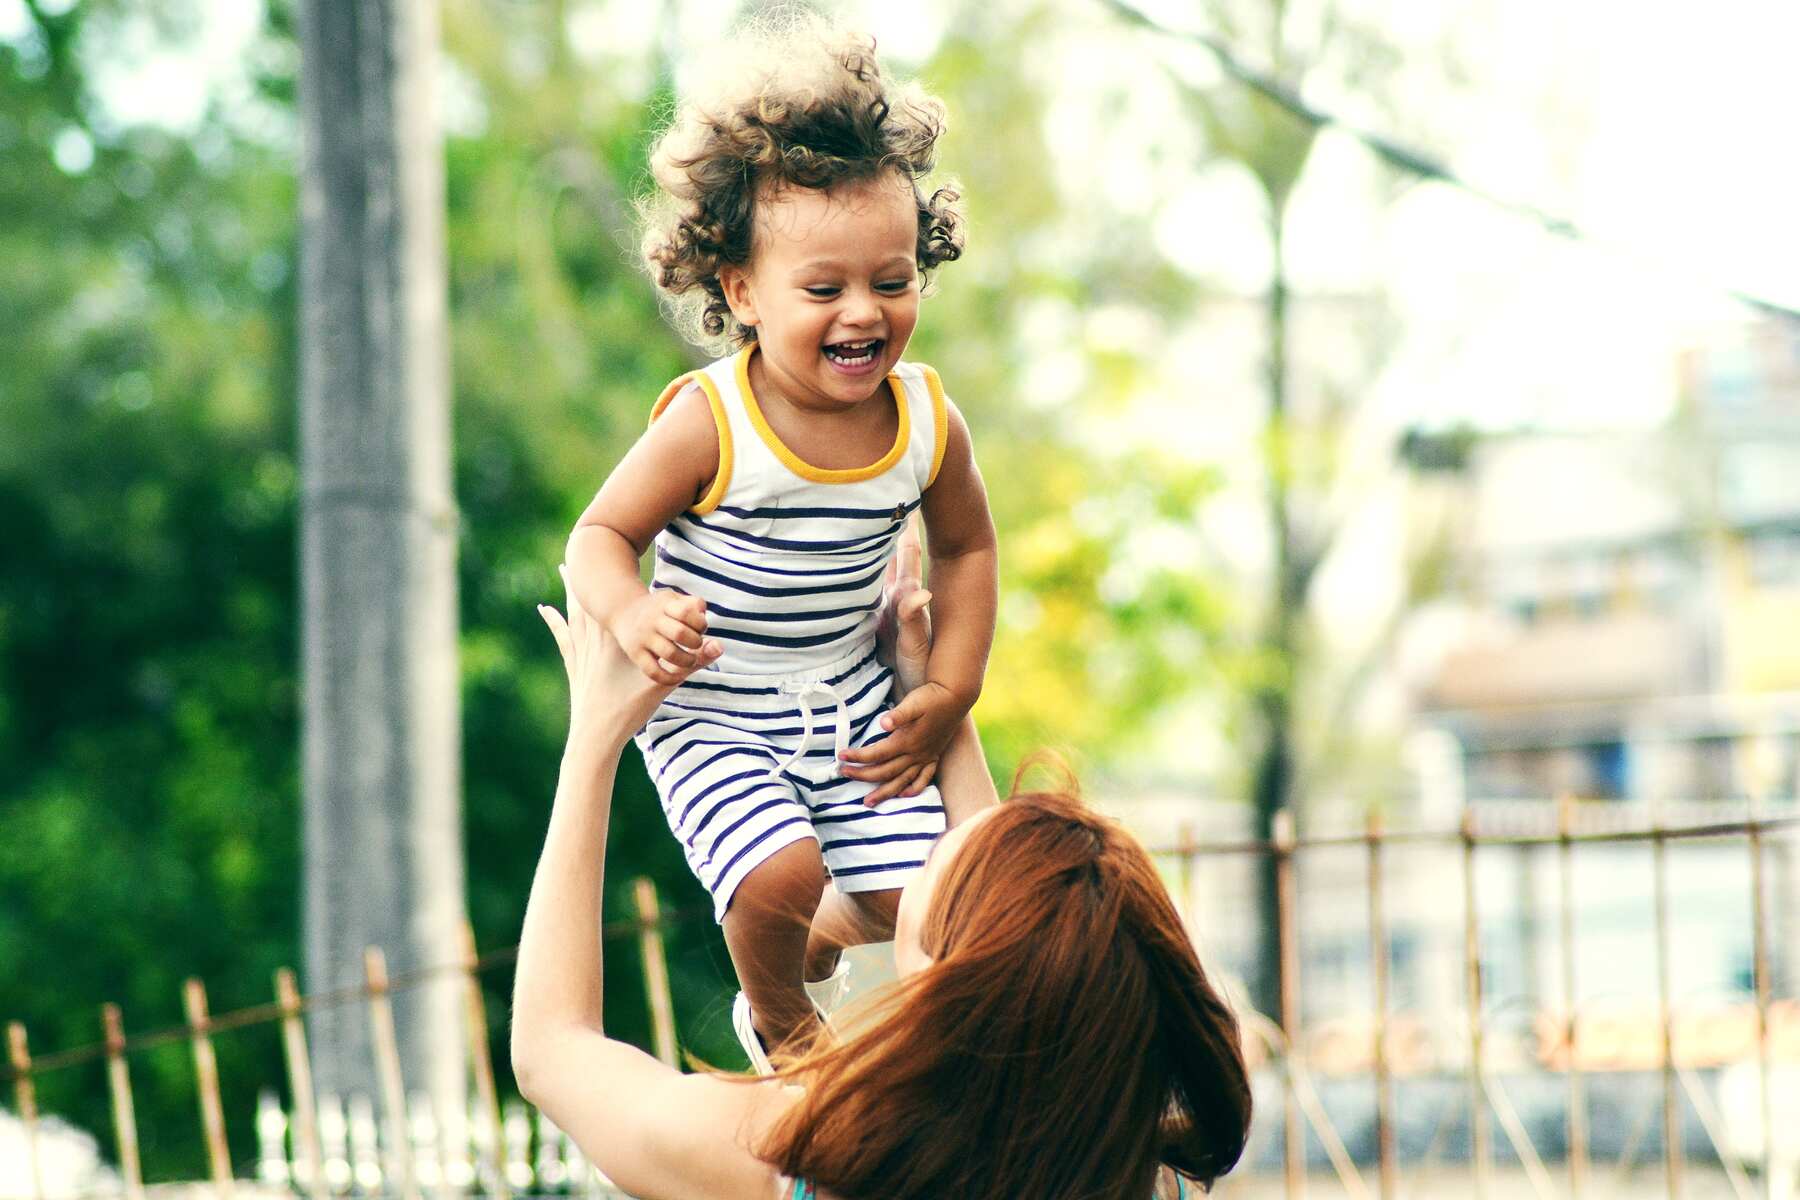 Mom lifting her daughter up during their playtime outdoors